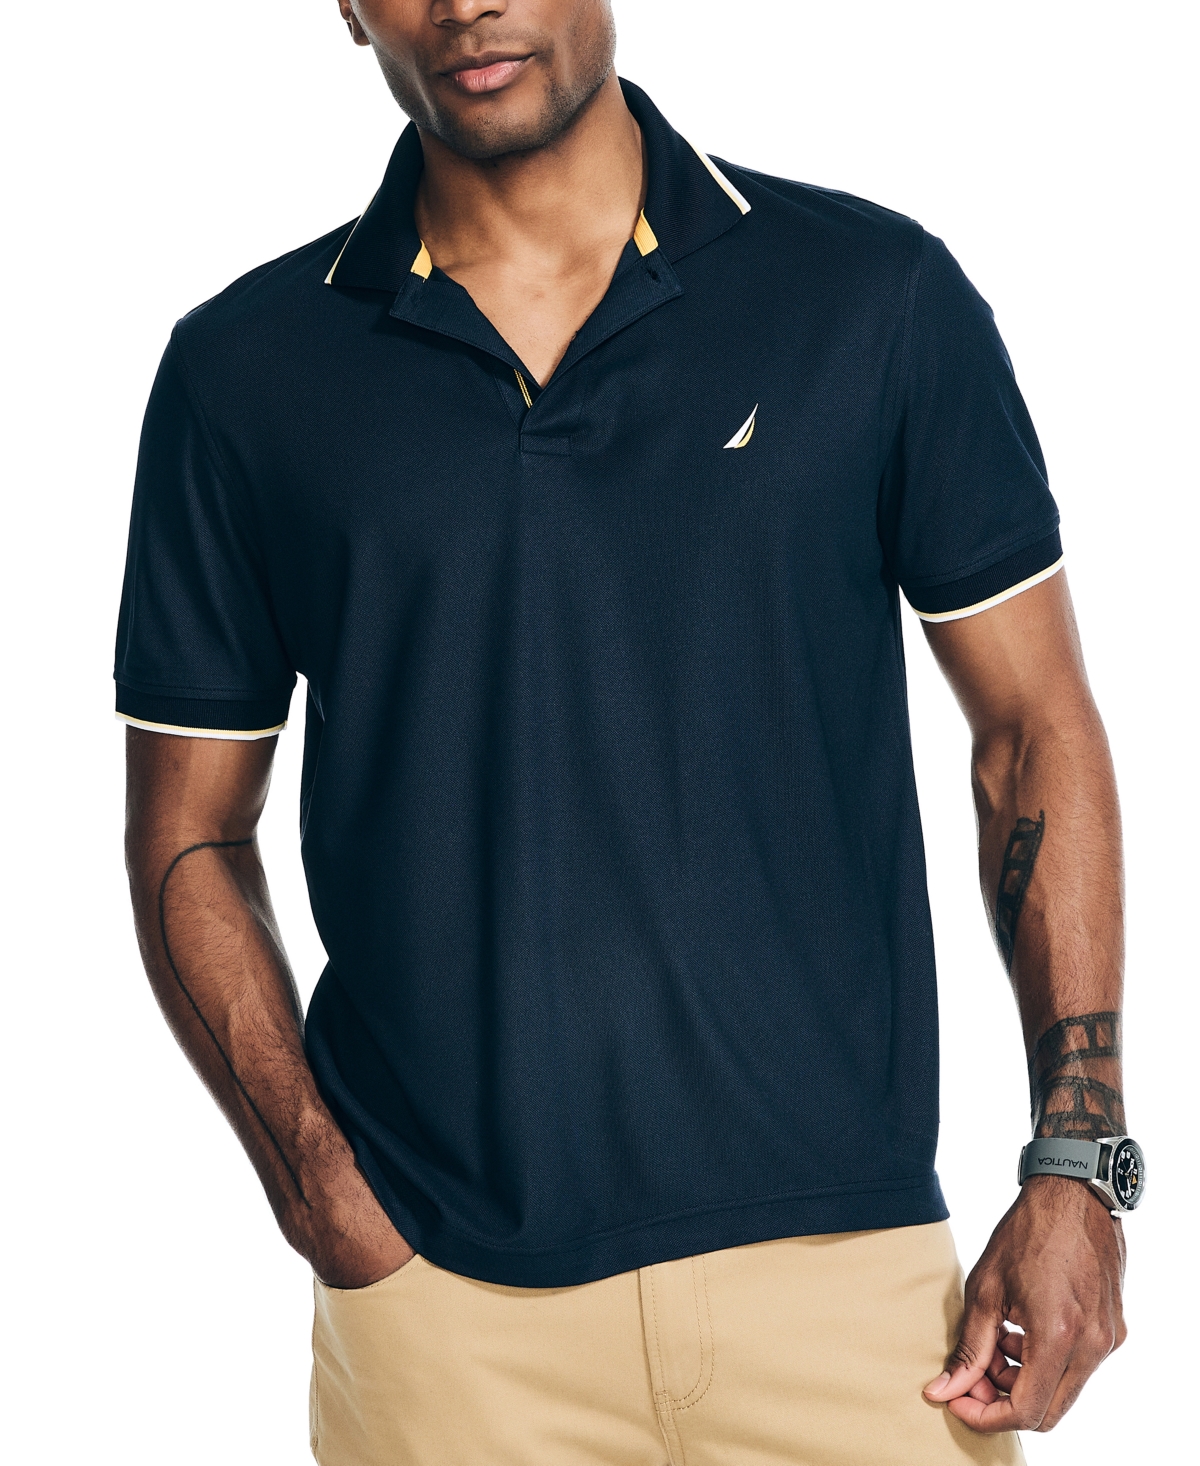 NAUTICA MEN'S NAVTECH CLASSIC-FIT MOISTURE-WICKING PERFORMANCE TIPPED POLO SHIRT